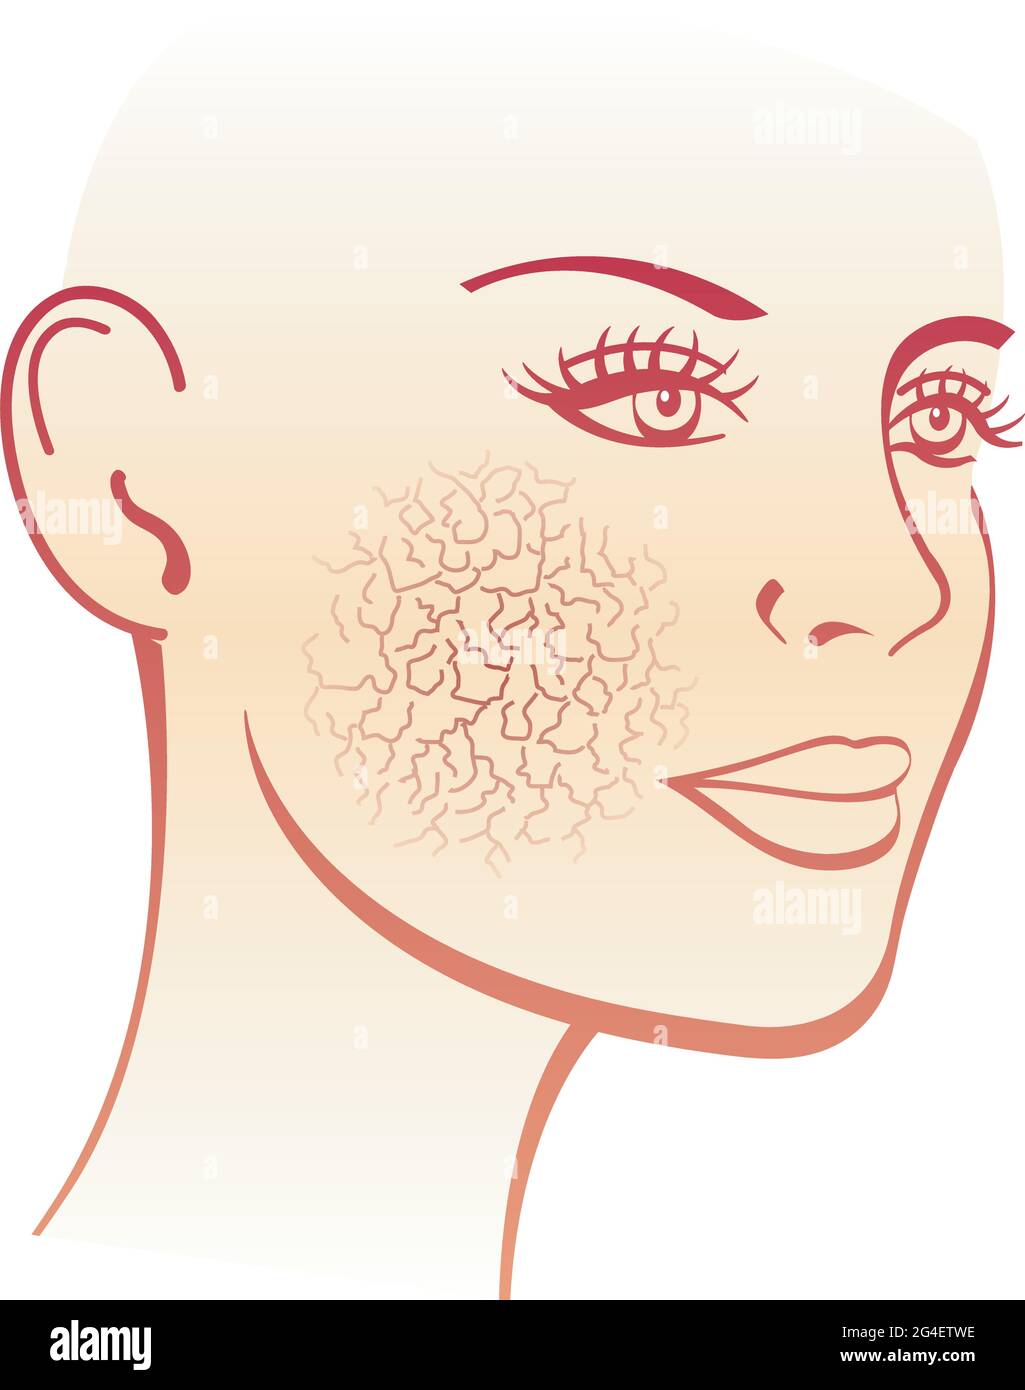 Medical illustration of the symptoms of dry skin. Stock Vector